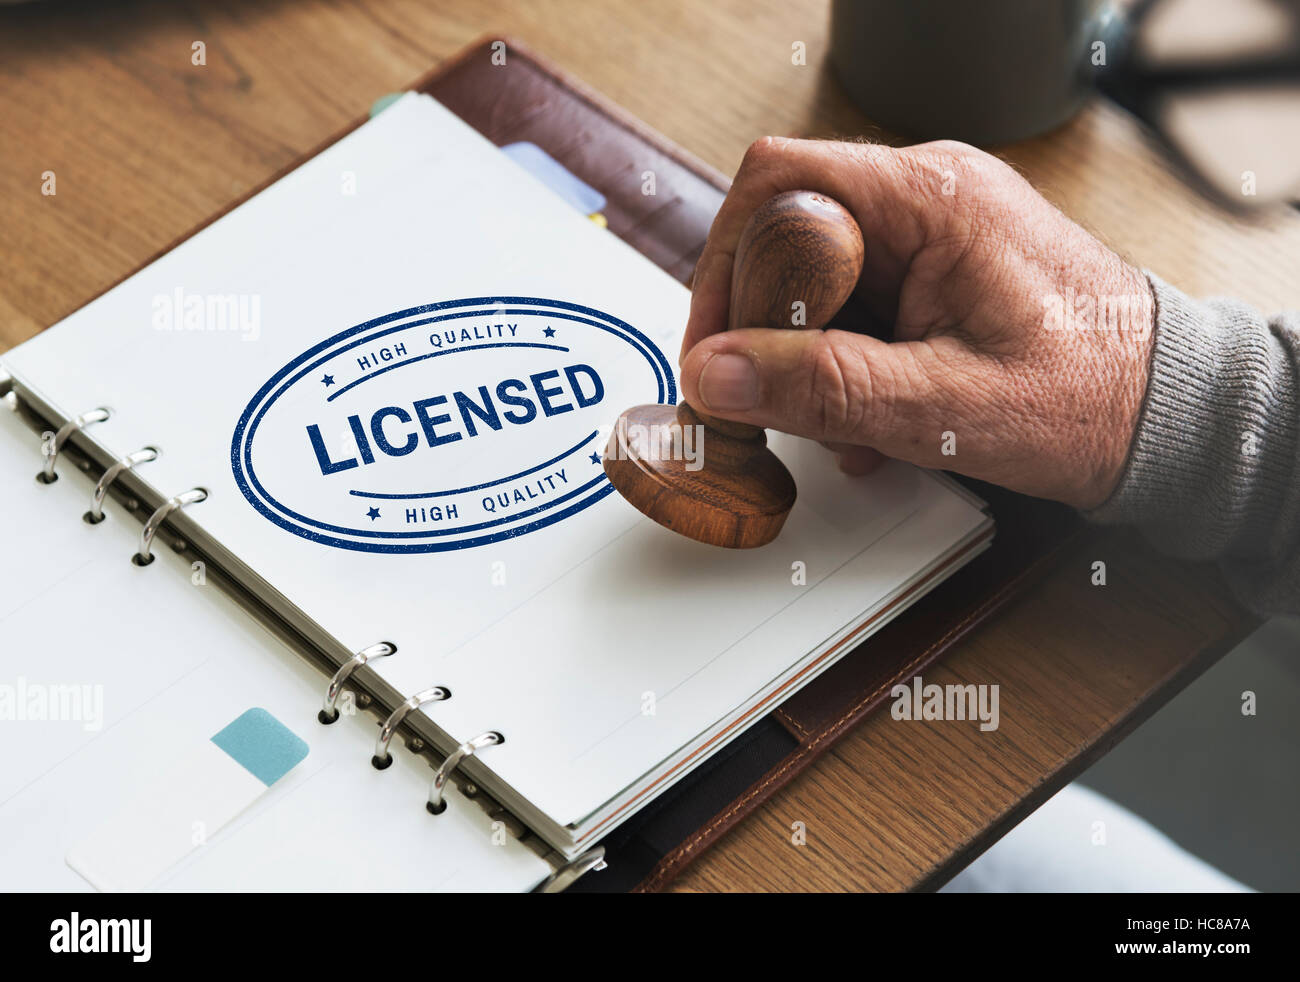 Licensed Approval Authority Permission Conept Stock Photo